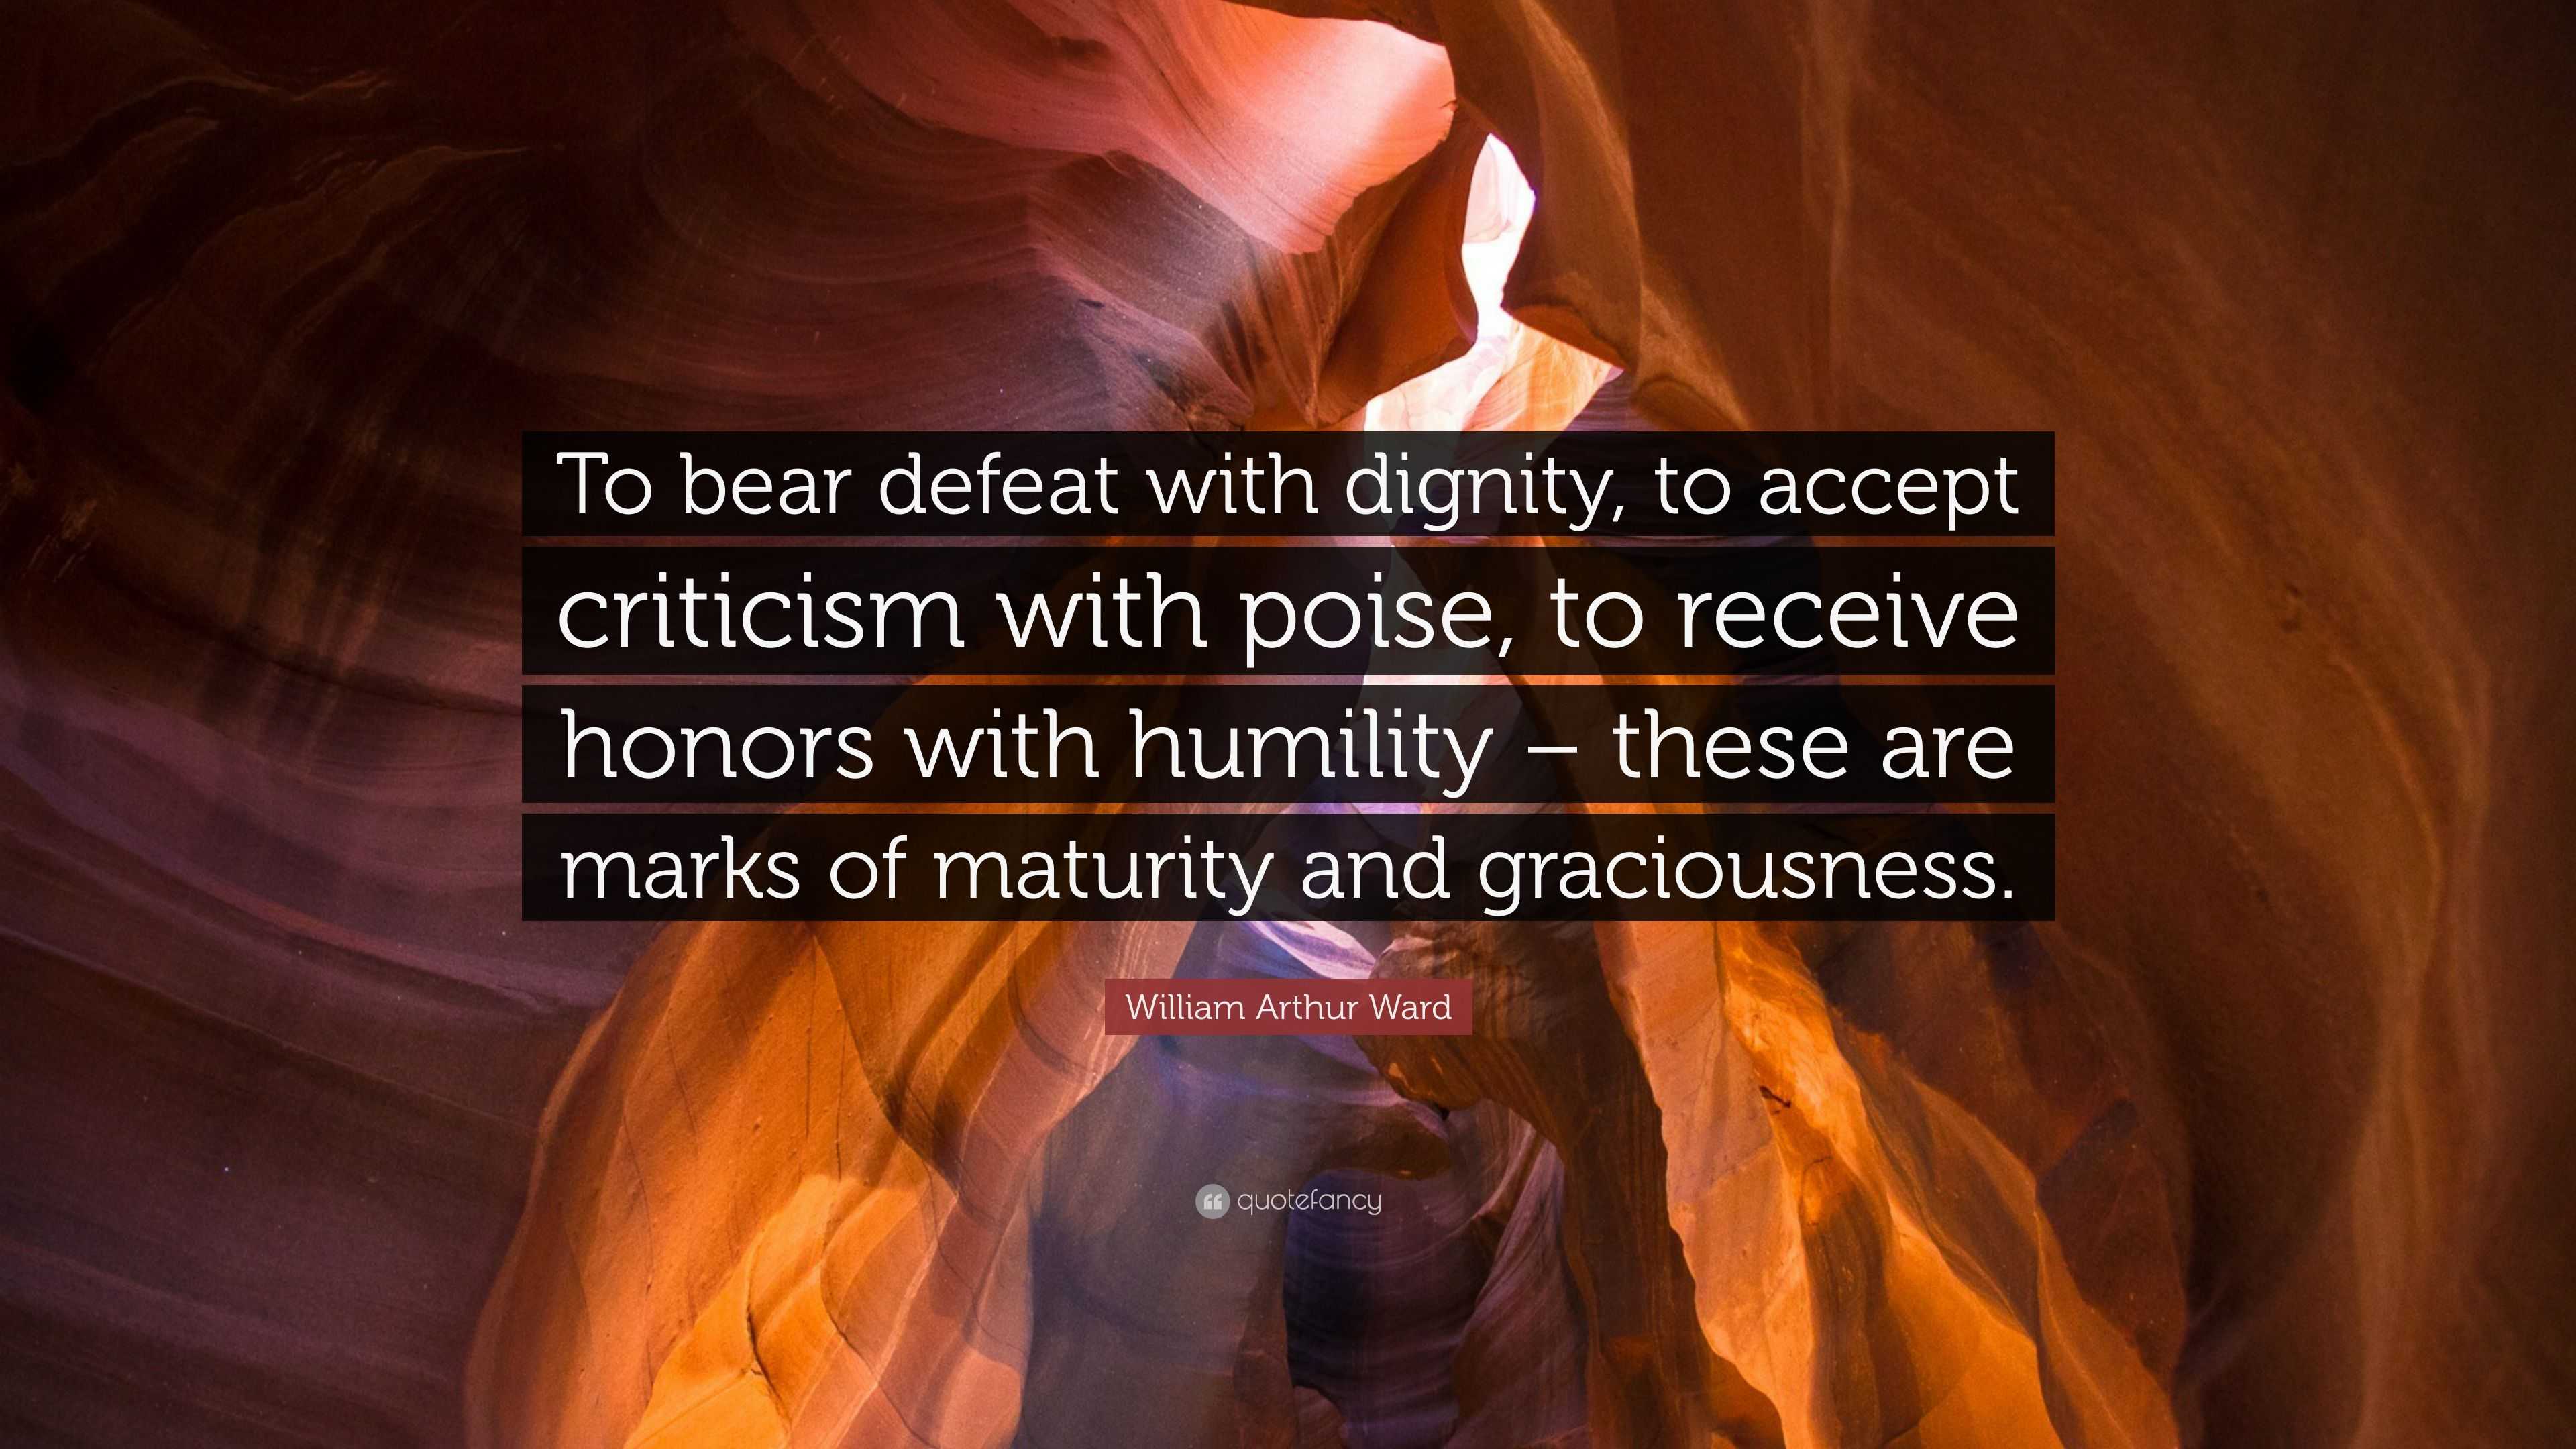 William Arthur Ward Quote: “To bear defeat with dignity, to accept ...